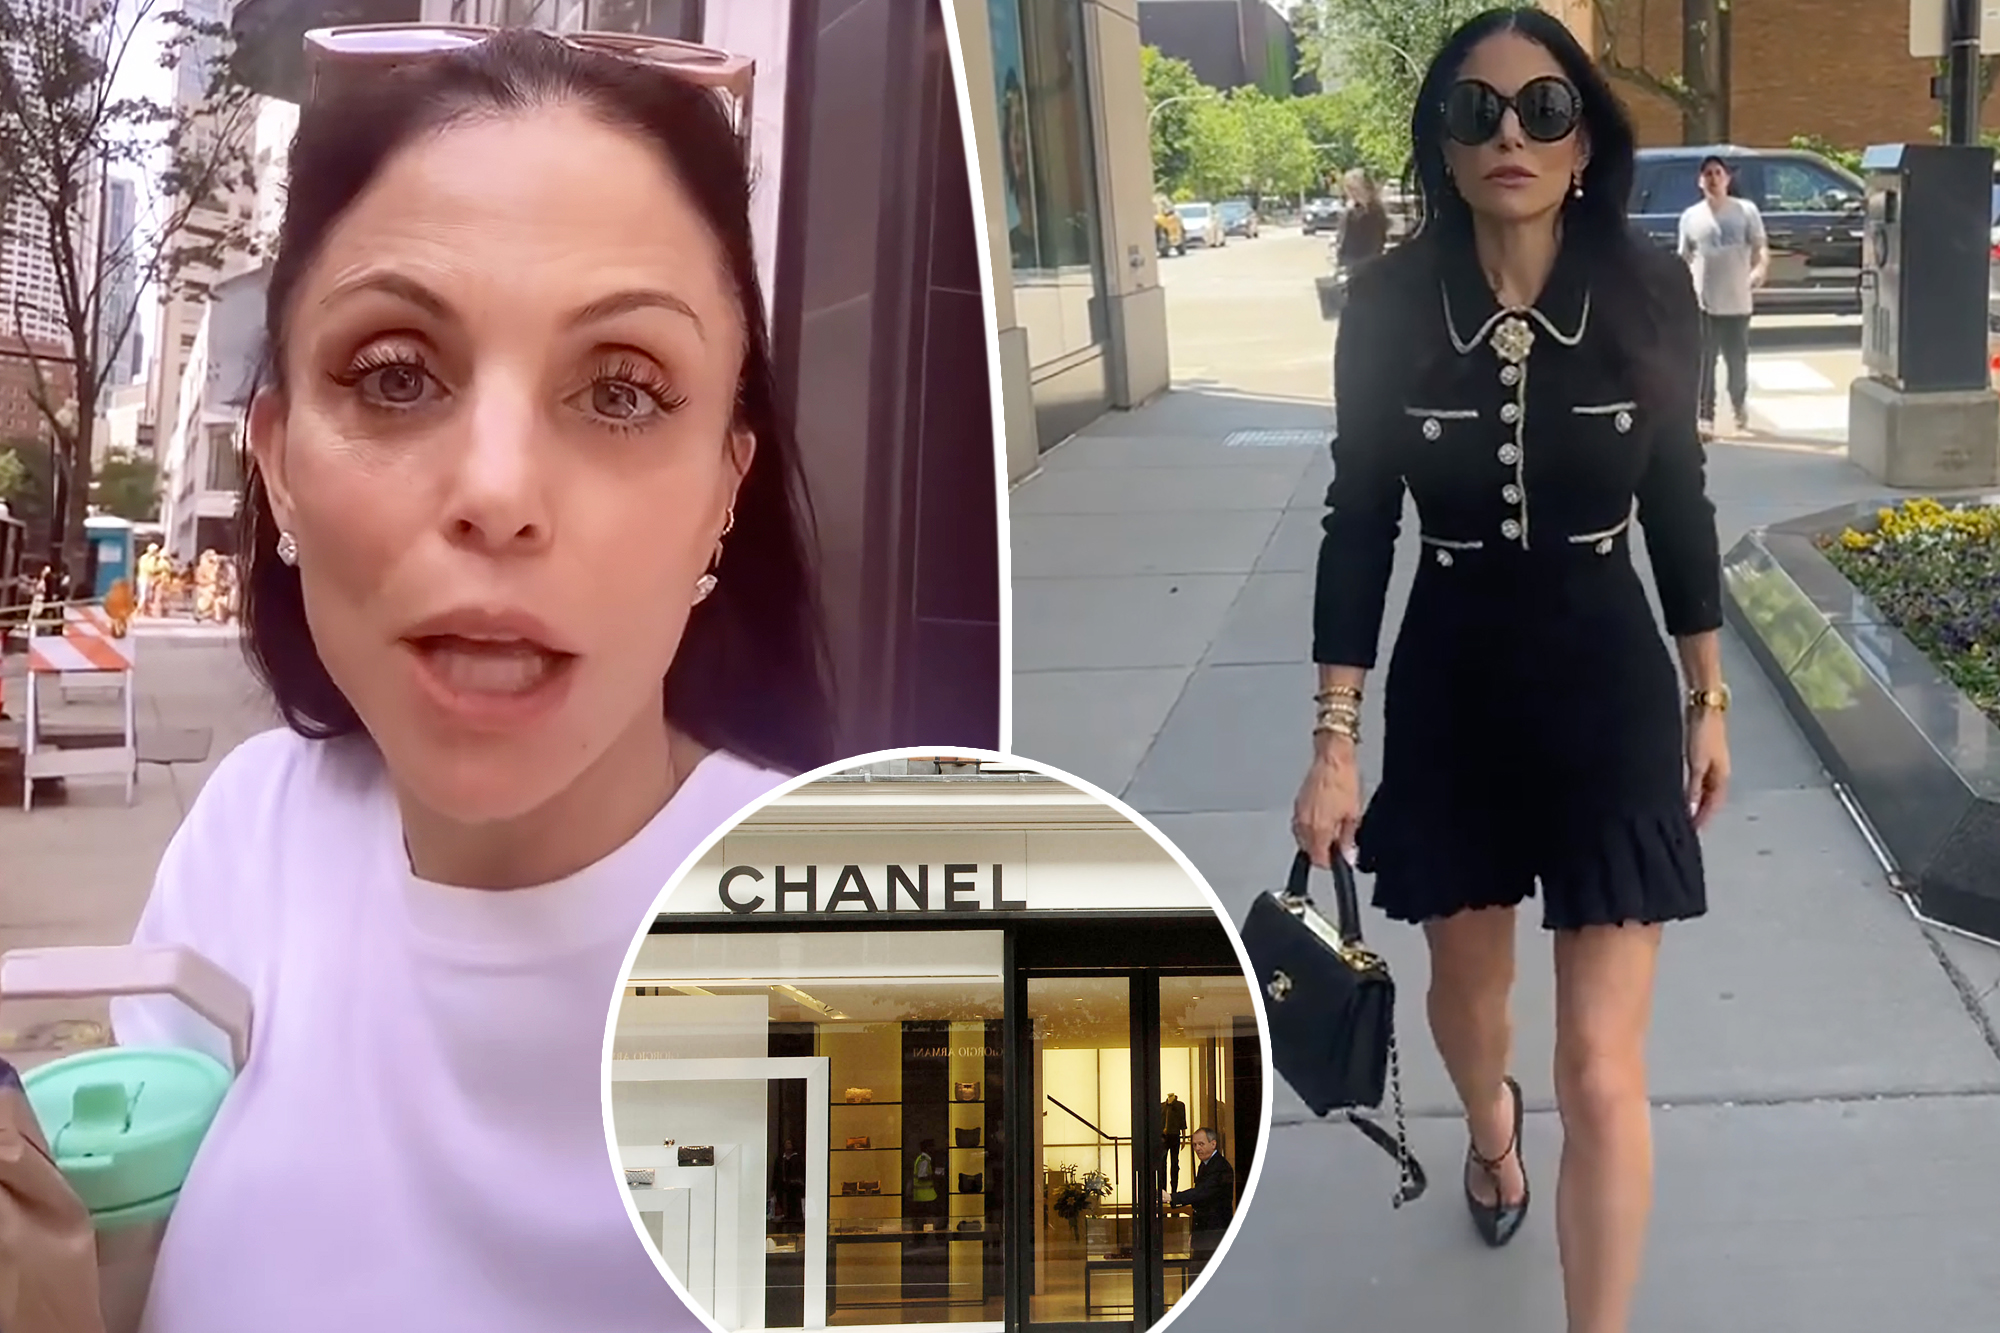 Bethenny Frankel's Encounter with Chanel Sparks Controversy